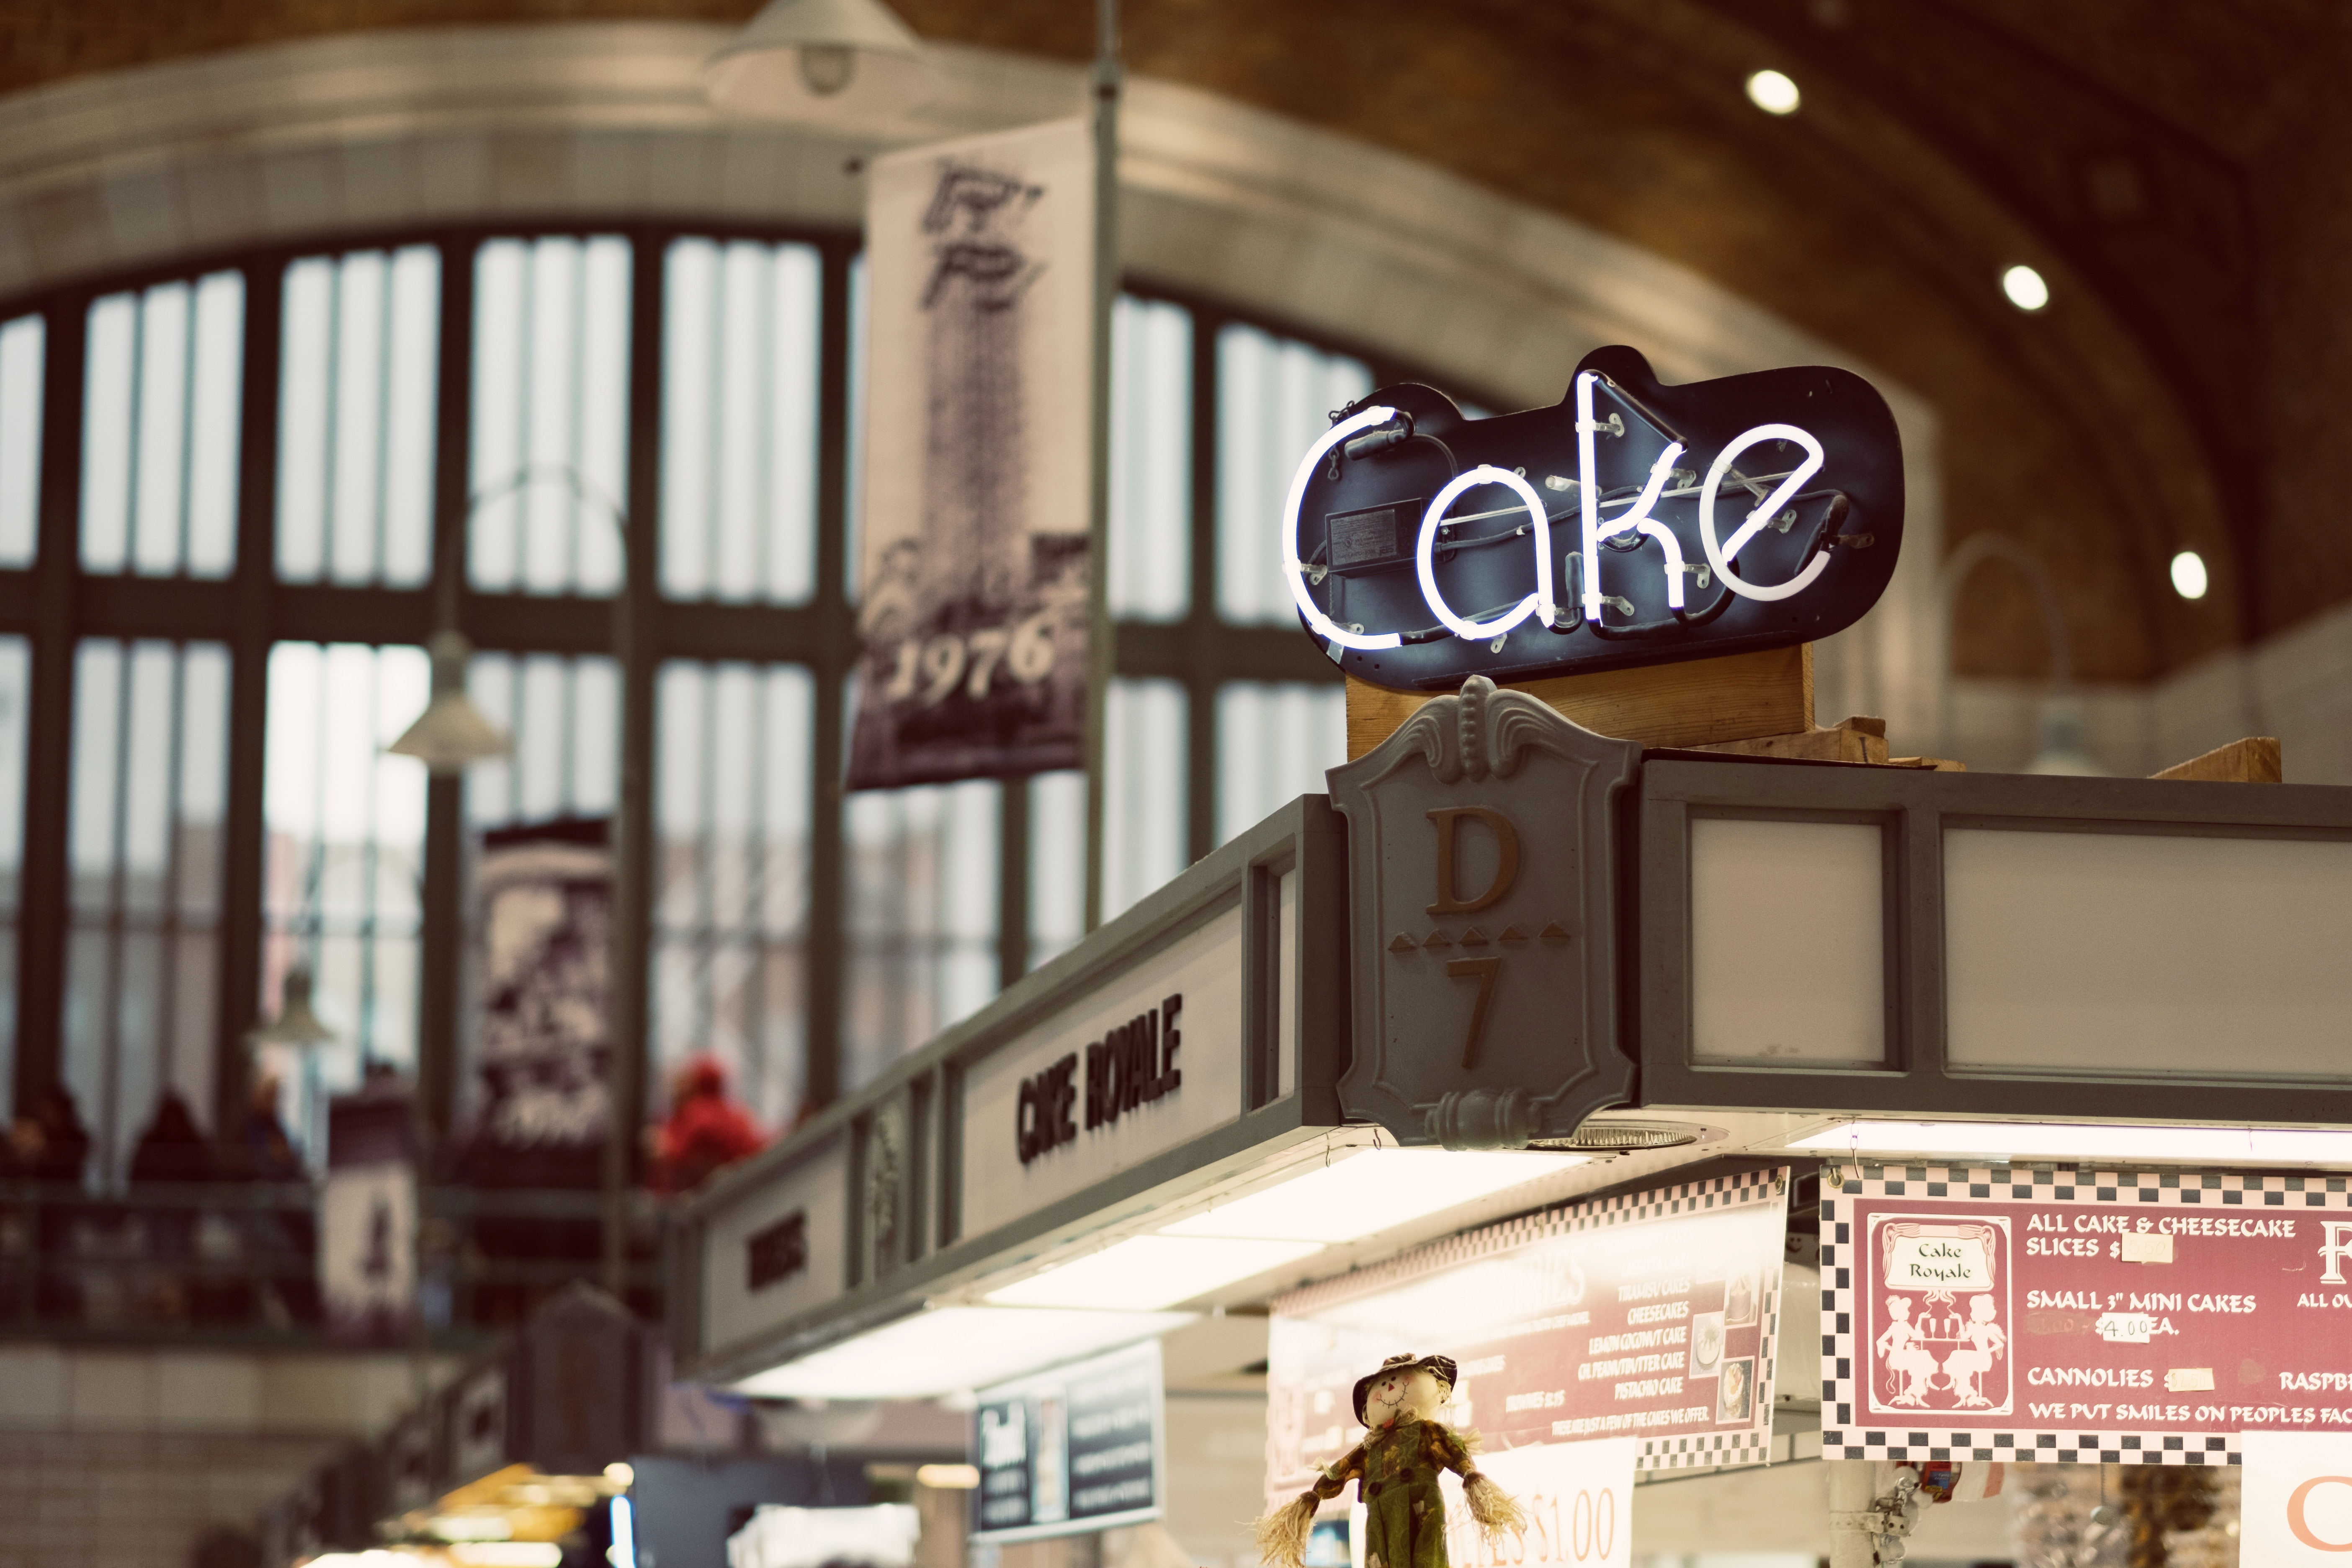 words, sign, signboard, bakery products, baking, cafe, café